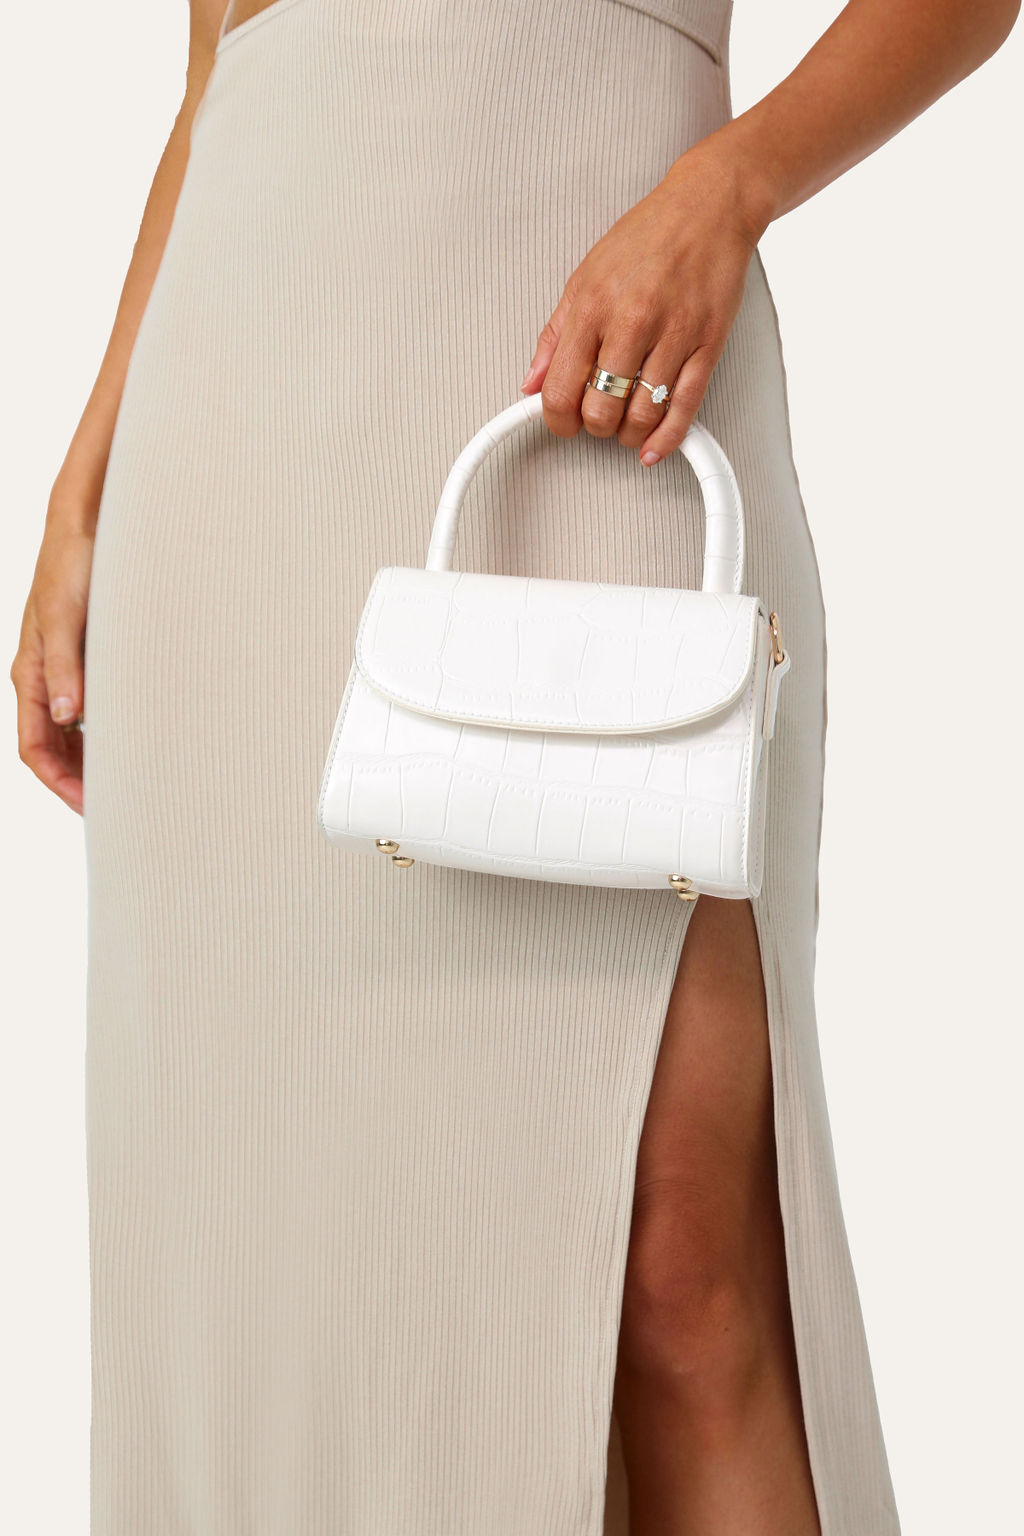 Model holding the White Micro Purse, front angle.